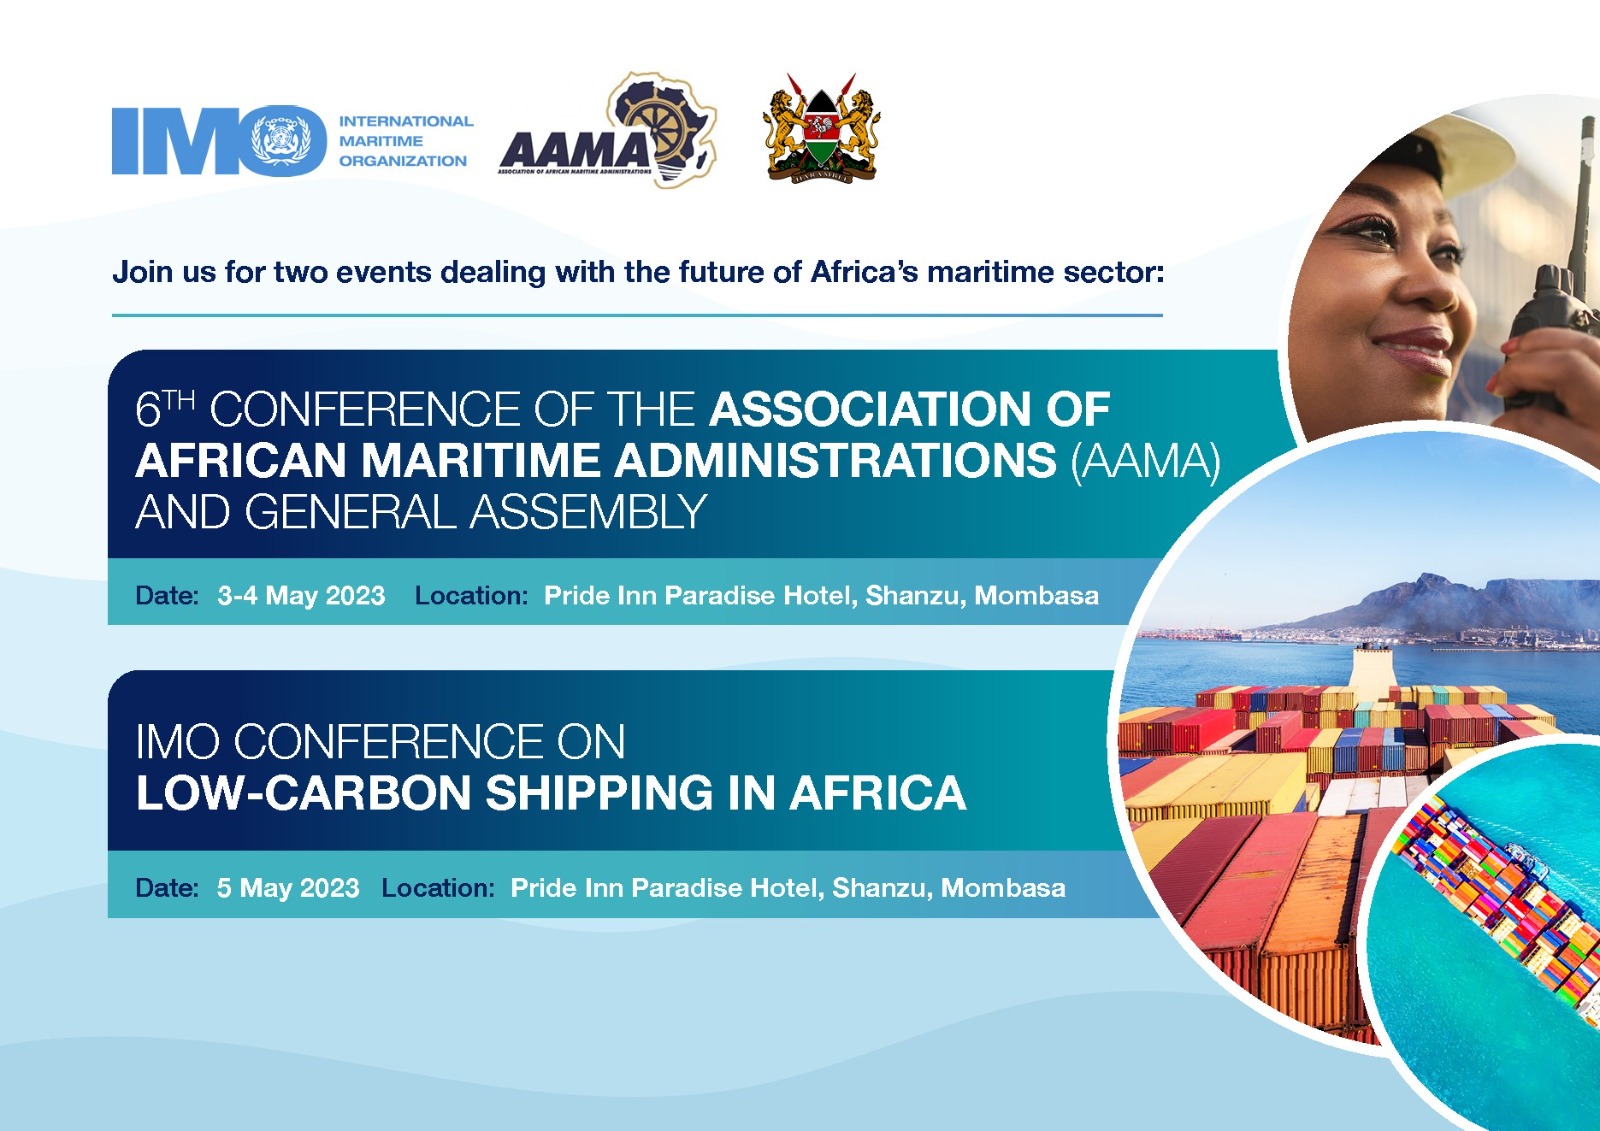 Association of African Maritime Administrations (AAMA) Conference